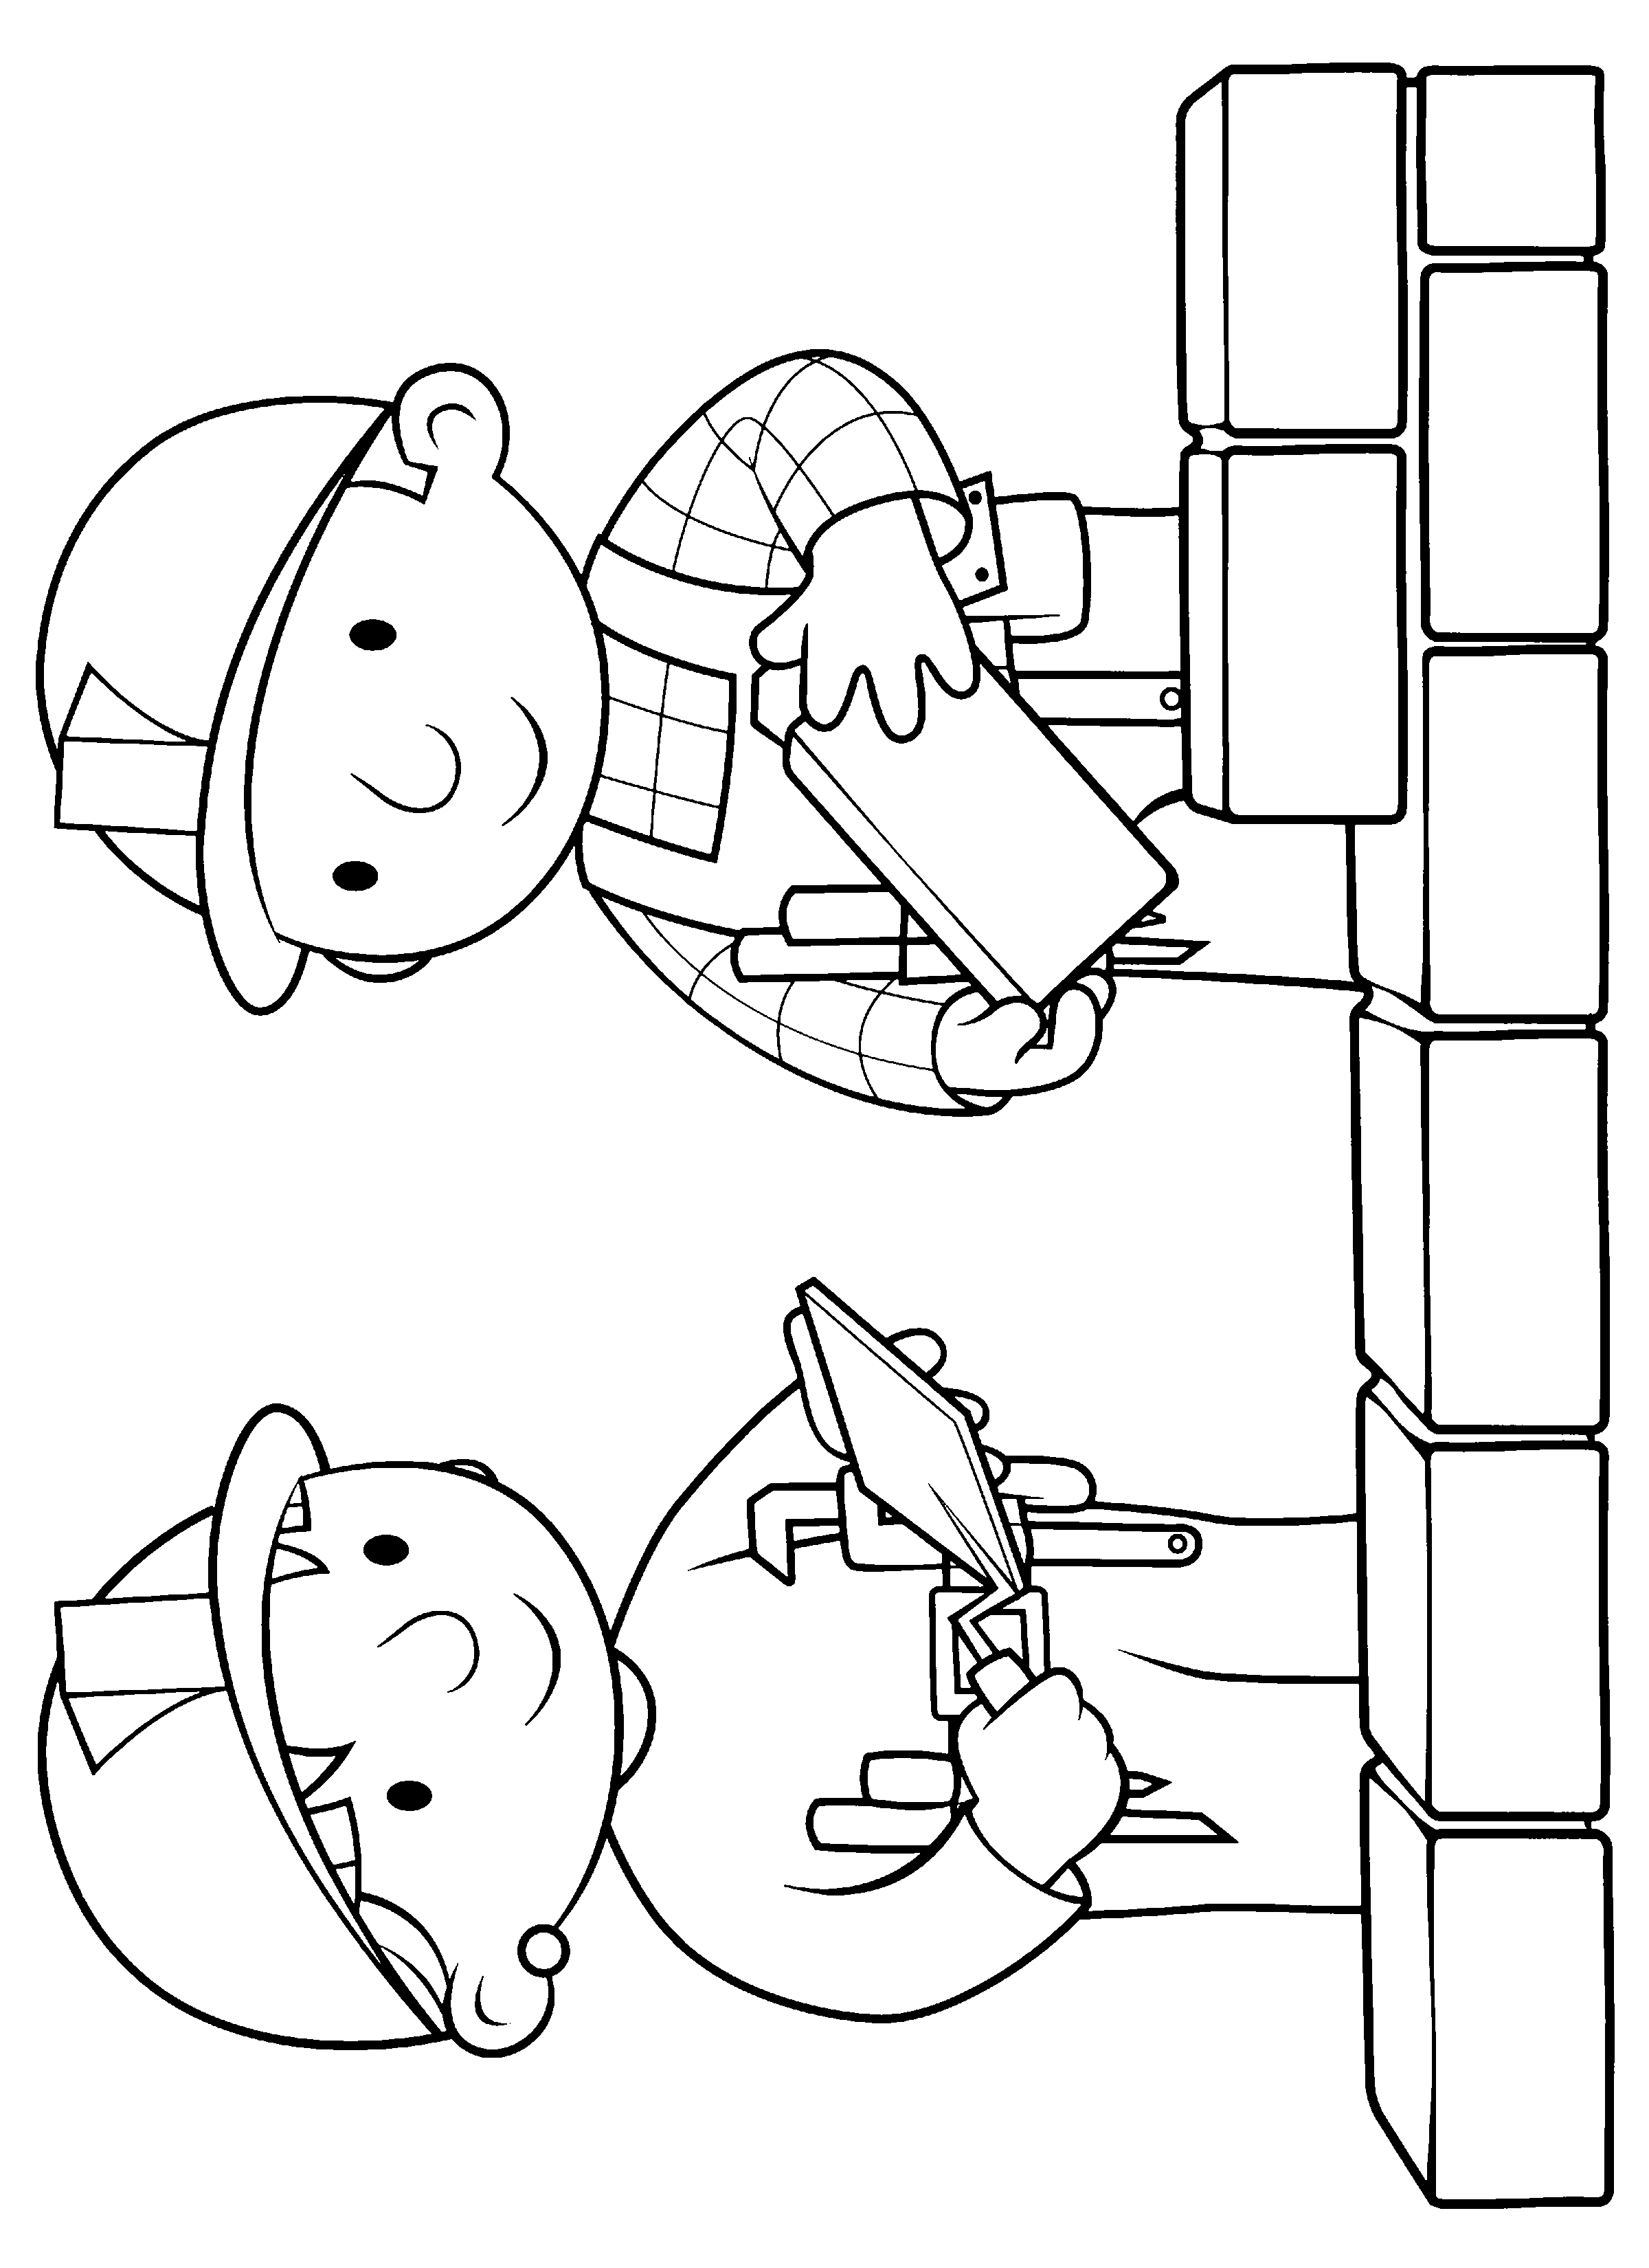 bob-the-builder coloring pages 14,printable,coloring pages